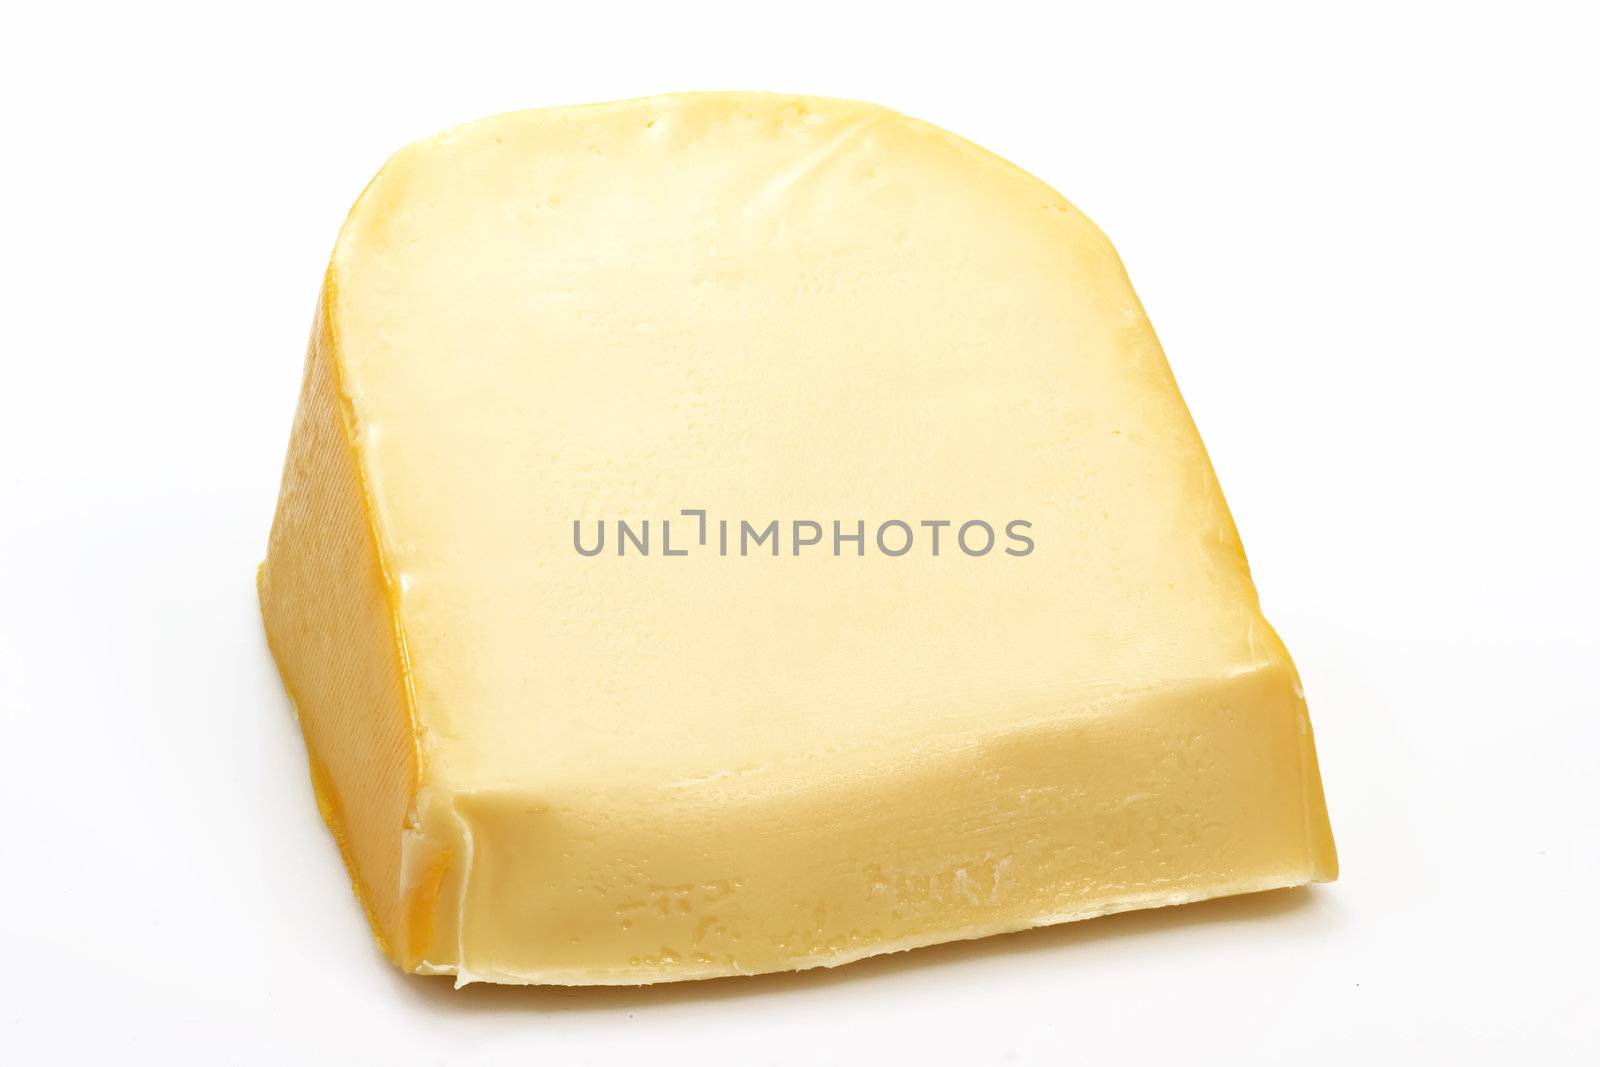 A big chunk of gouda cheese on bright background